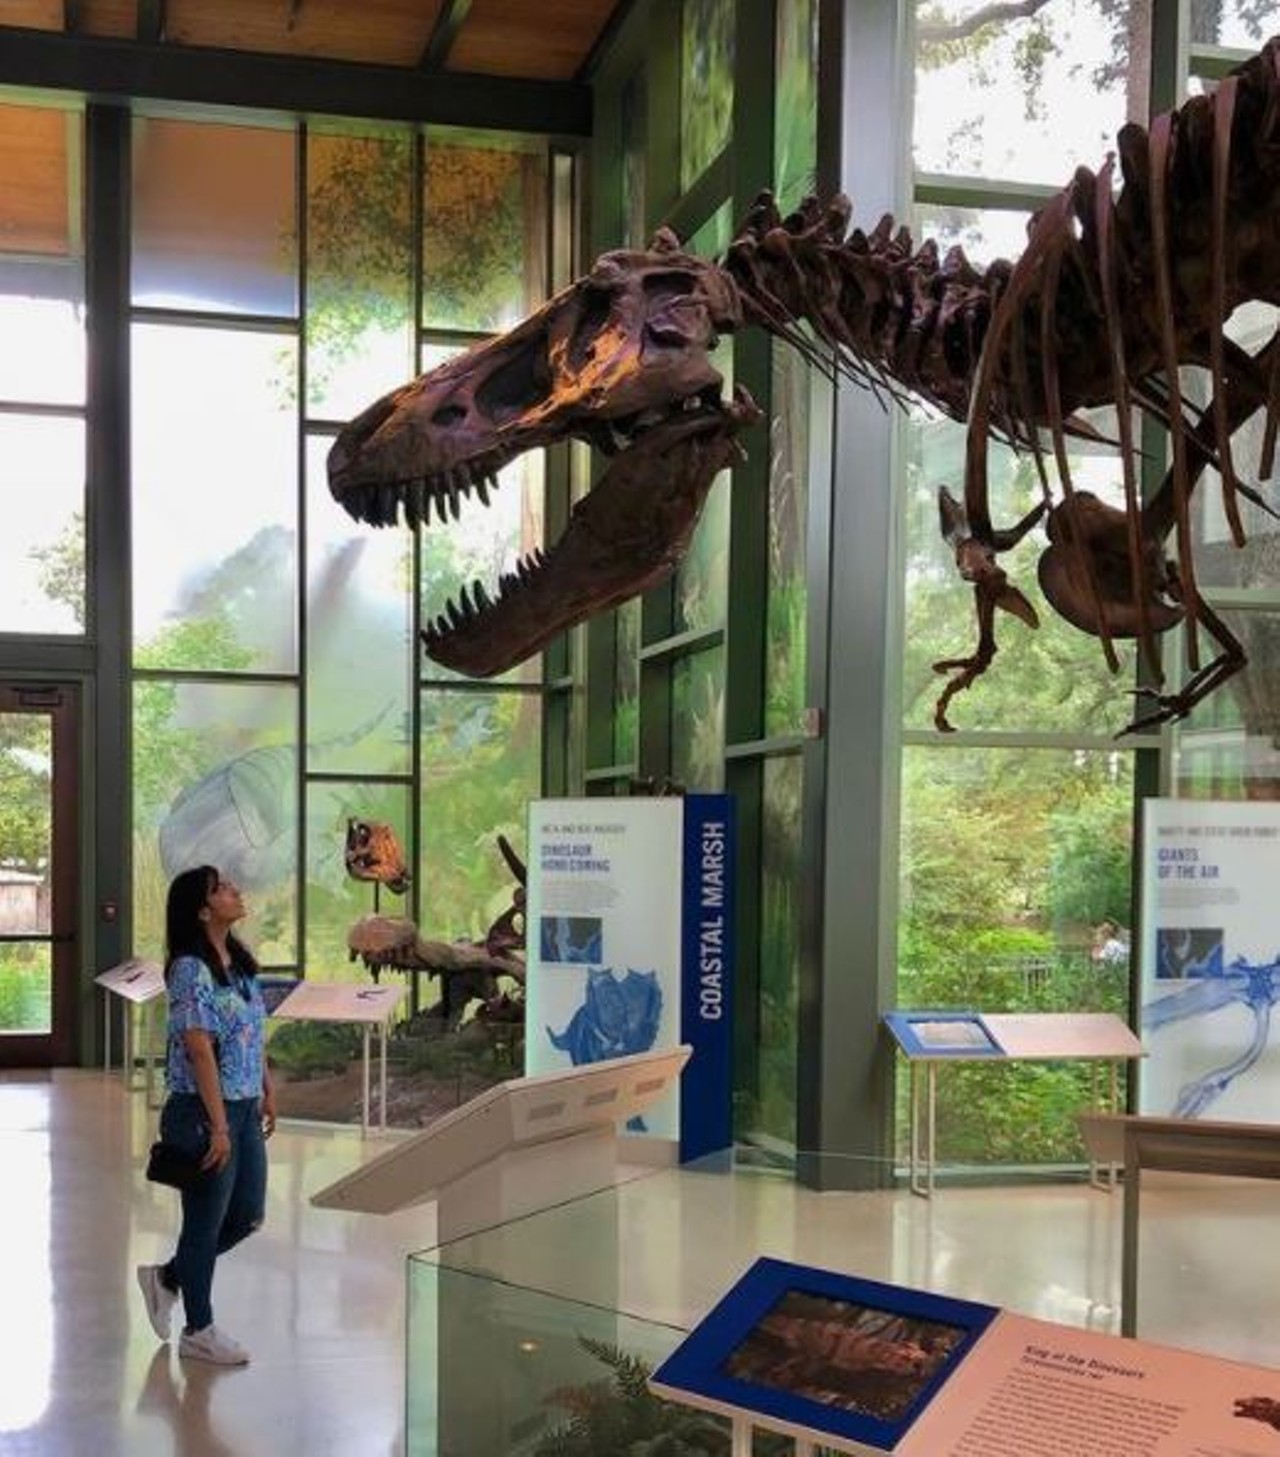 Find something for everyone at The Witte Museum
3801 Broadway St, (210) 357-1900, wittemuseum.org
From dinosaurs to human anatomy to Texas history, the Witte Museum has something for every guest to step through its doors. Admission fees are waived on Tuesday afternoons.
Photo via Instagram / jenngarlem